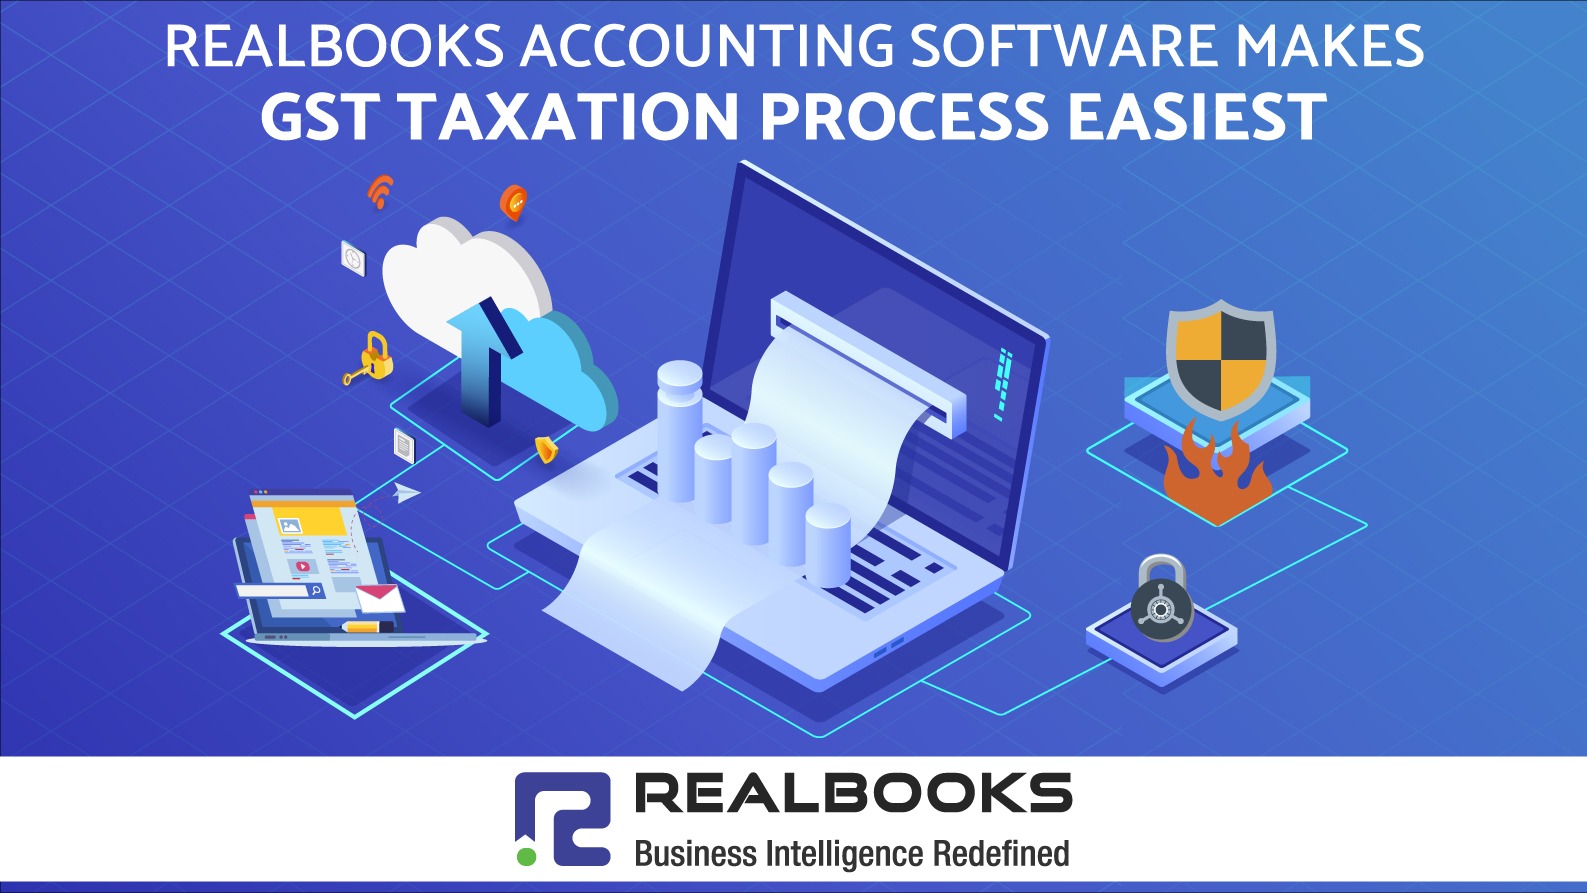 Make-GST-Taxation-Process-Easy-with-RealBooks